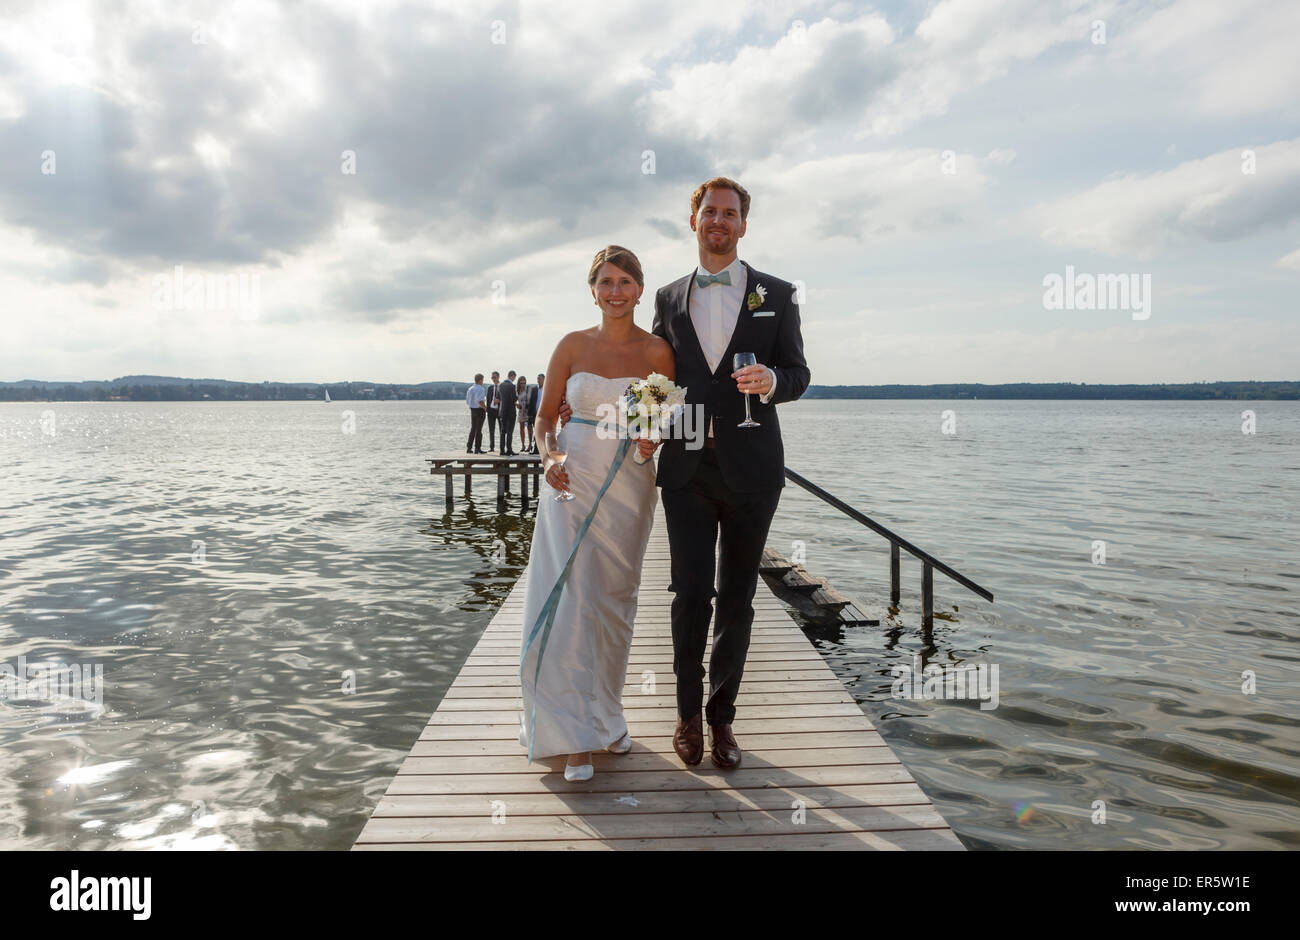 Bridal couple is walking along the jetty, Starnberger See, Bavaria, Germany Stock Photo